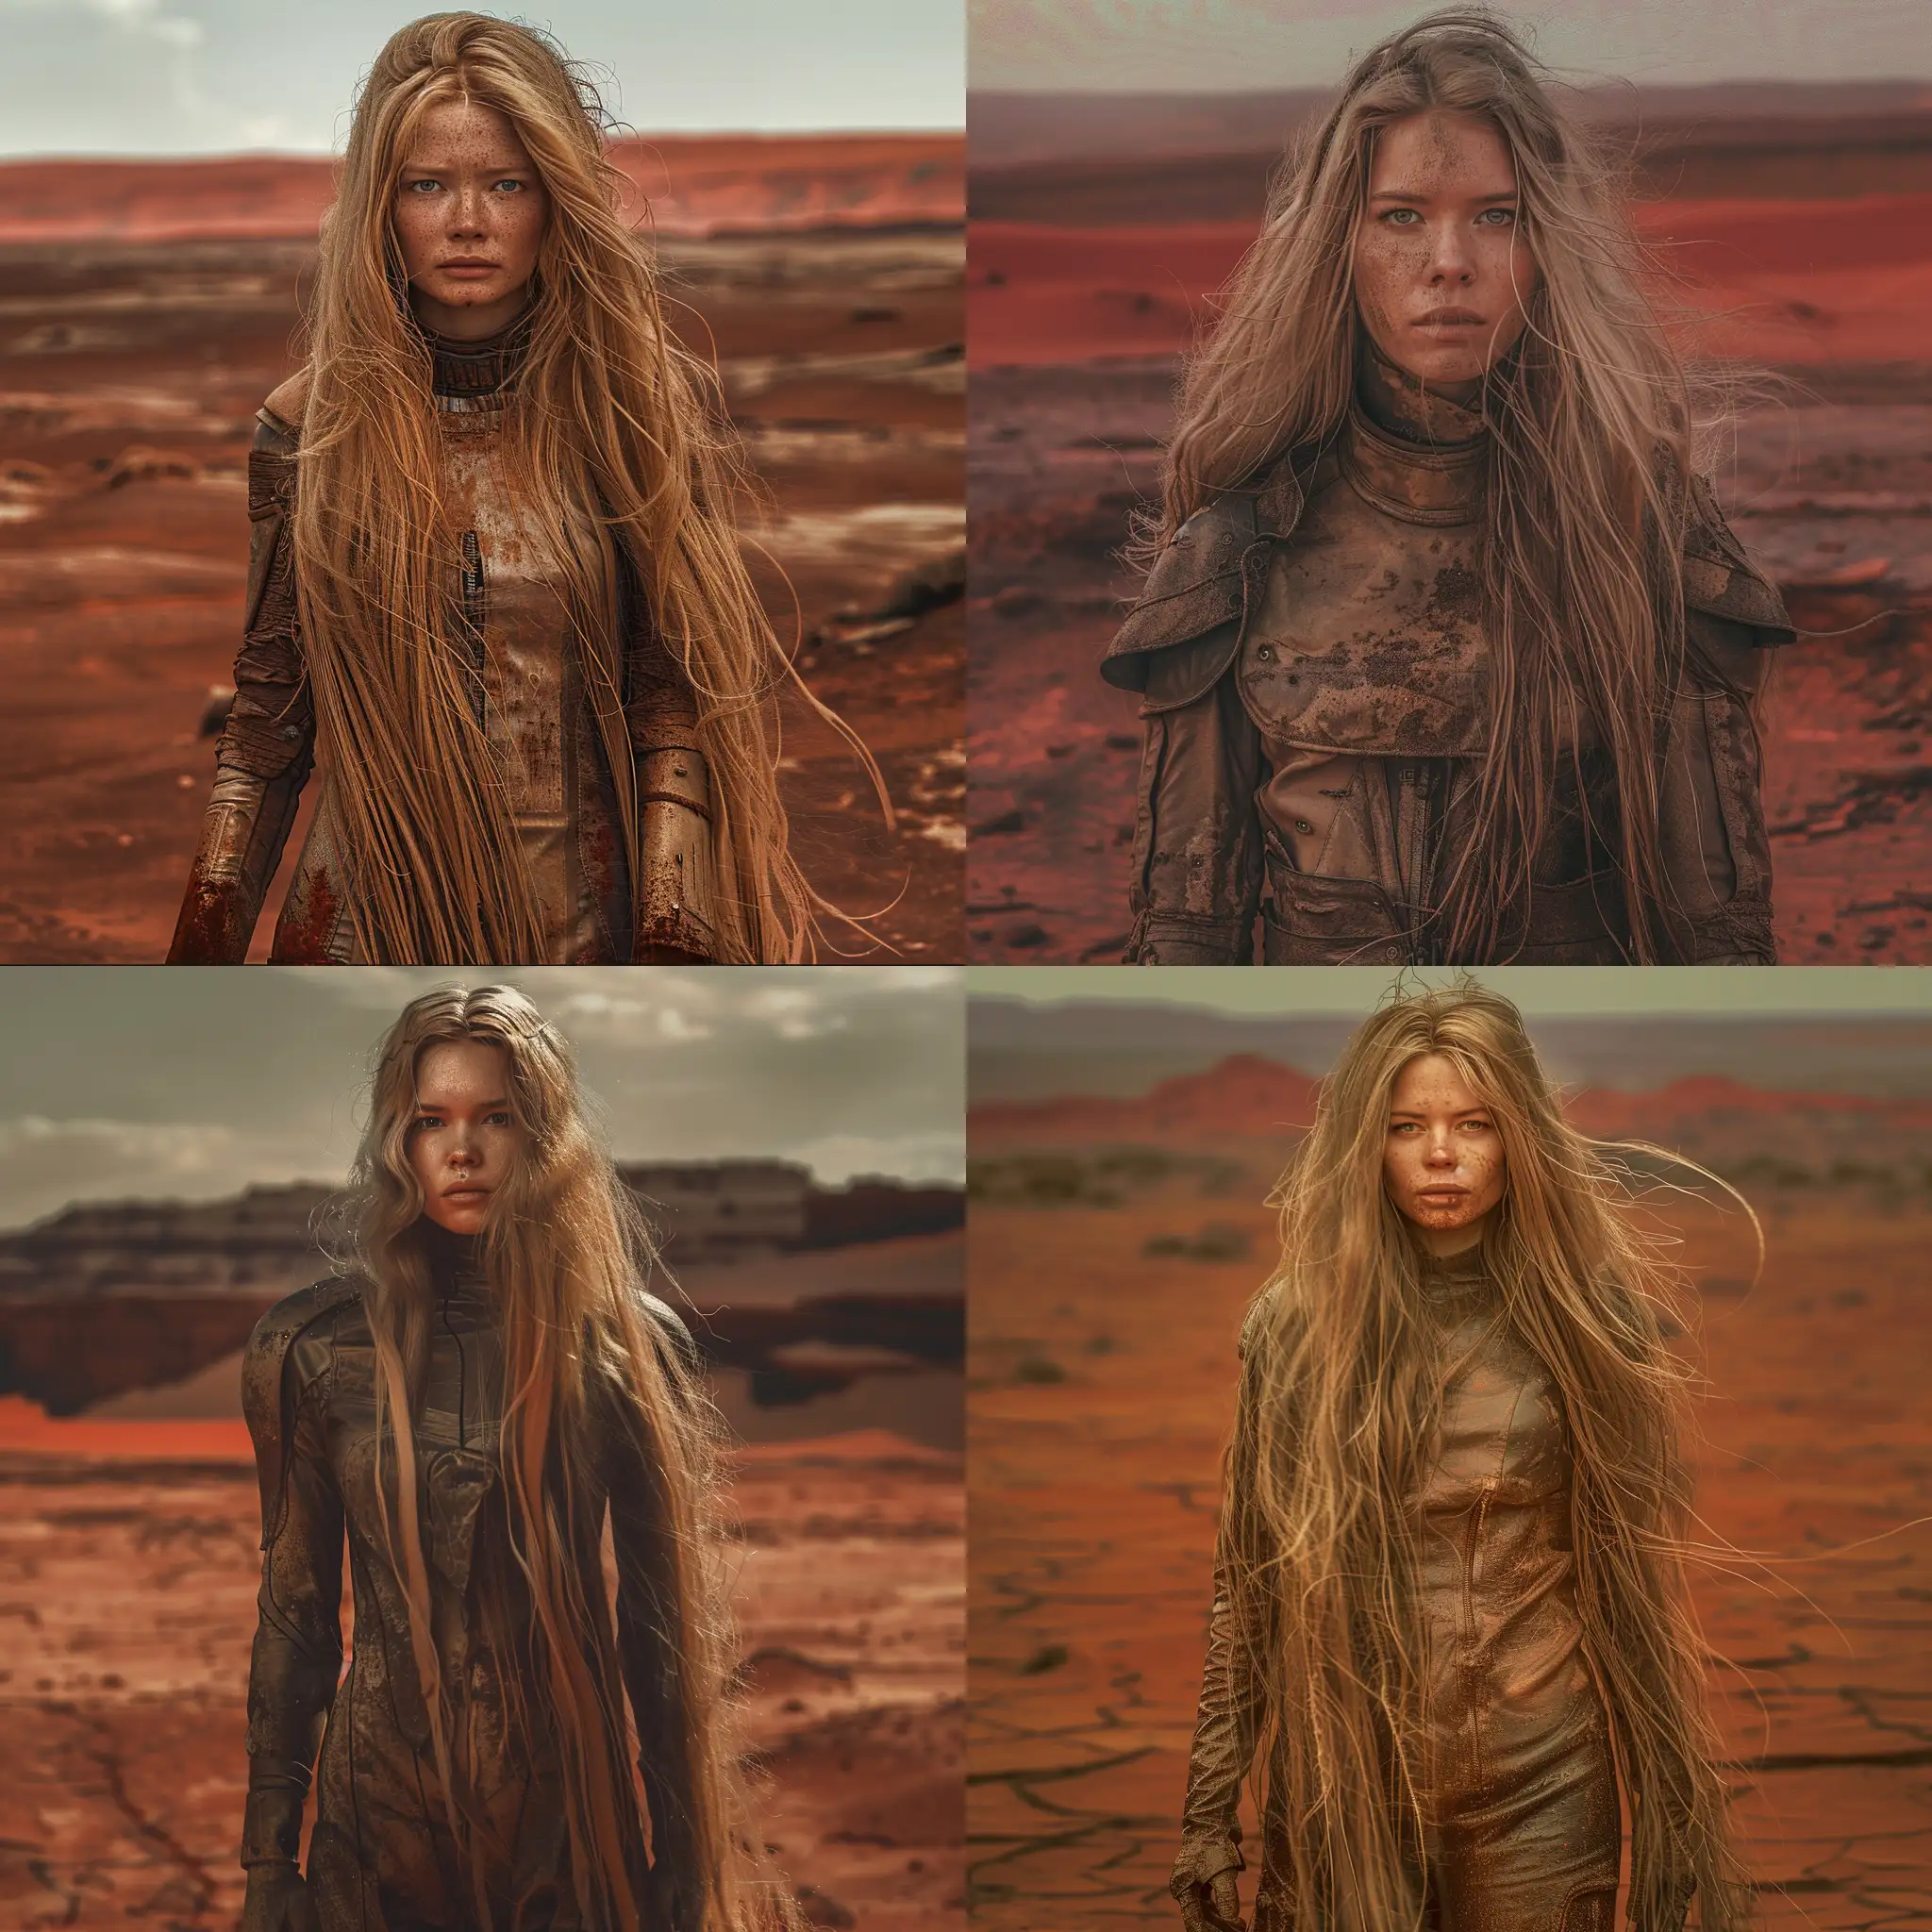 LongHaired-Woman-Surviving-in-PostApocalyptic-Desert